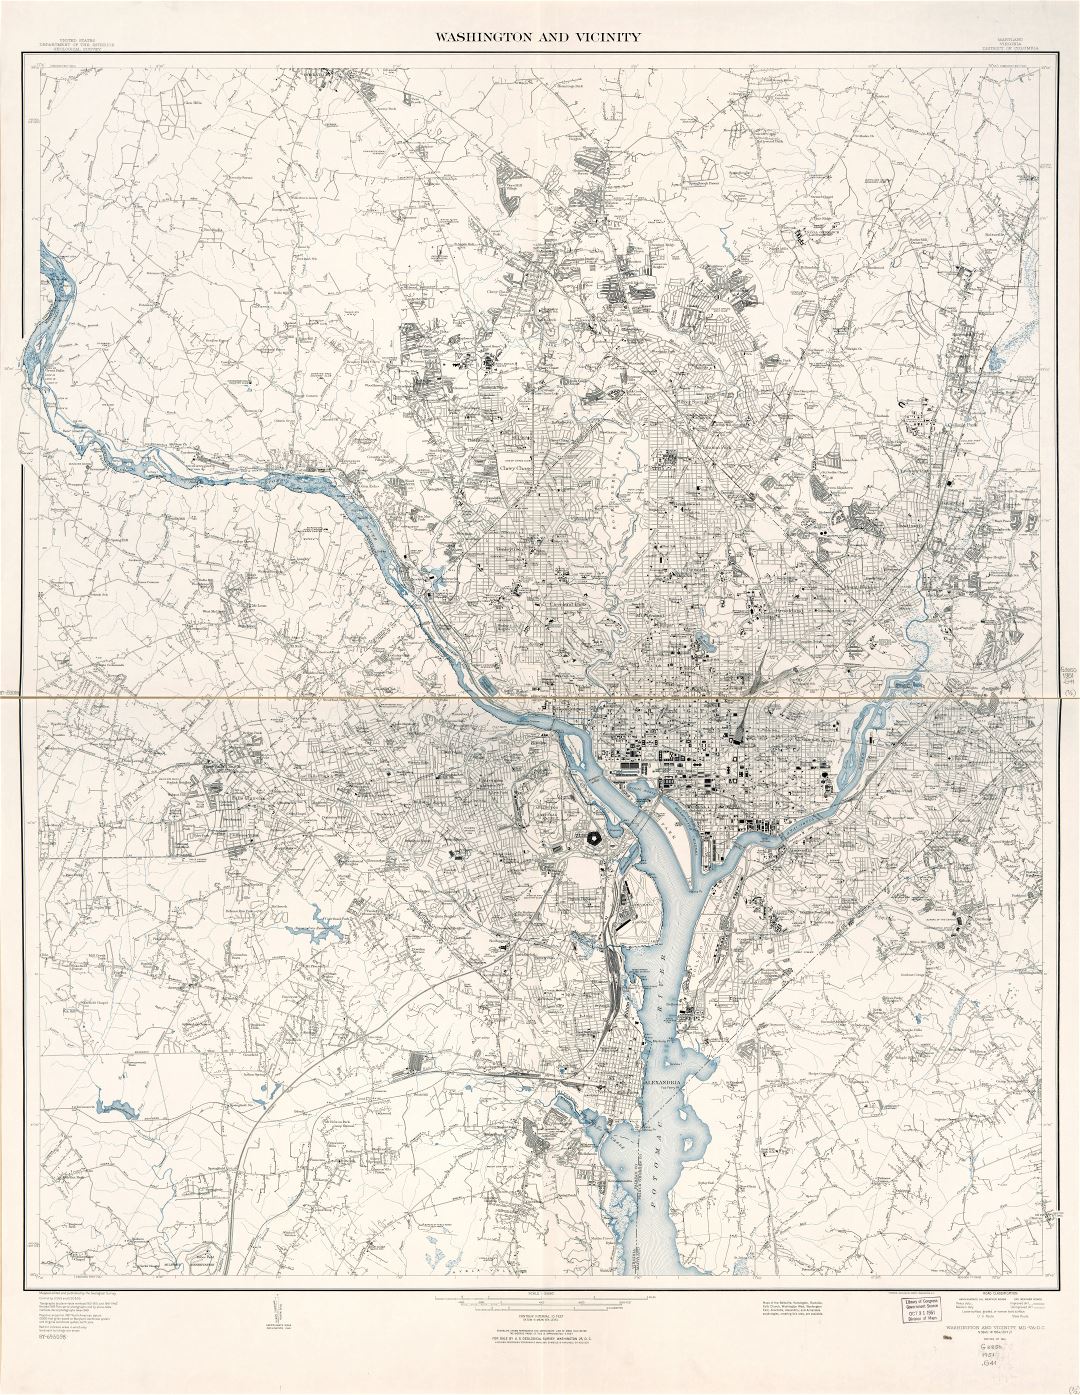 Large scale detailed map of Washington and vicinity, District of Columbia, Maryland, Virginia - 1951